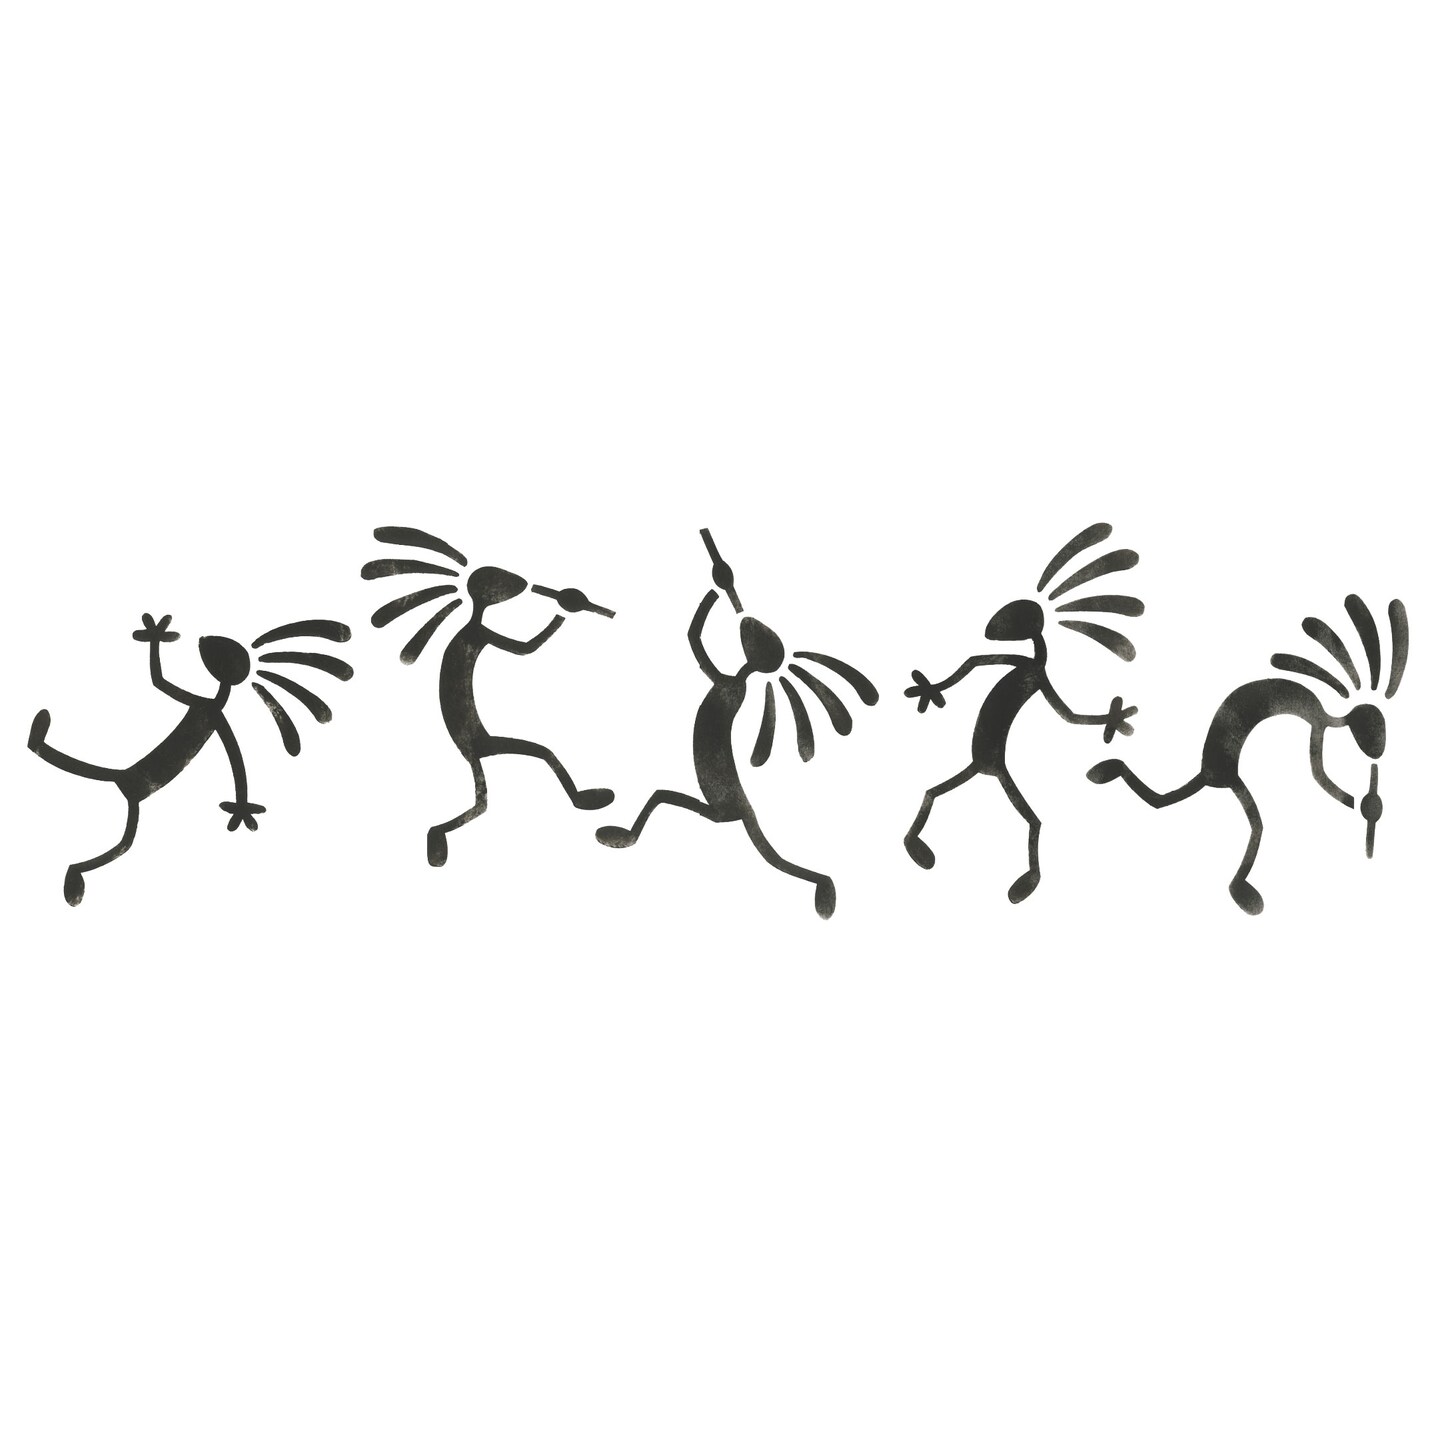 Kokopellis Wall Stencil | 3171 by Designer Stencils | Pattern Stencils | Reusable Stencils for Painting | Safe &#x26; Reusable Template for Wall Decor | Try This Stencil Instead of a Wallpaper | Easy to Use &#x26; Clean Art Stencil Pattern